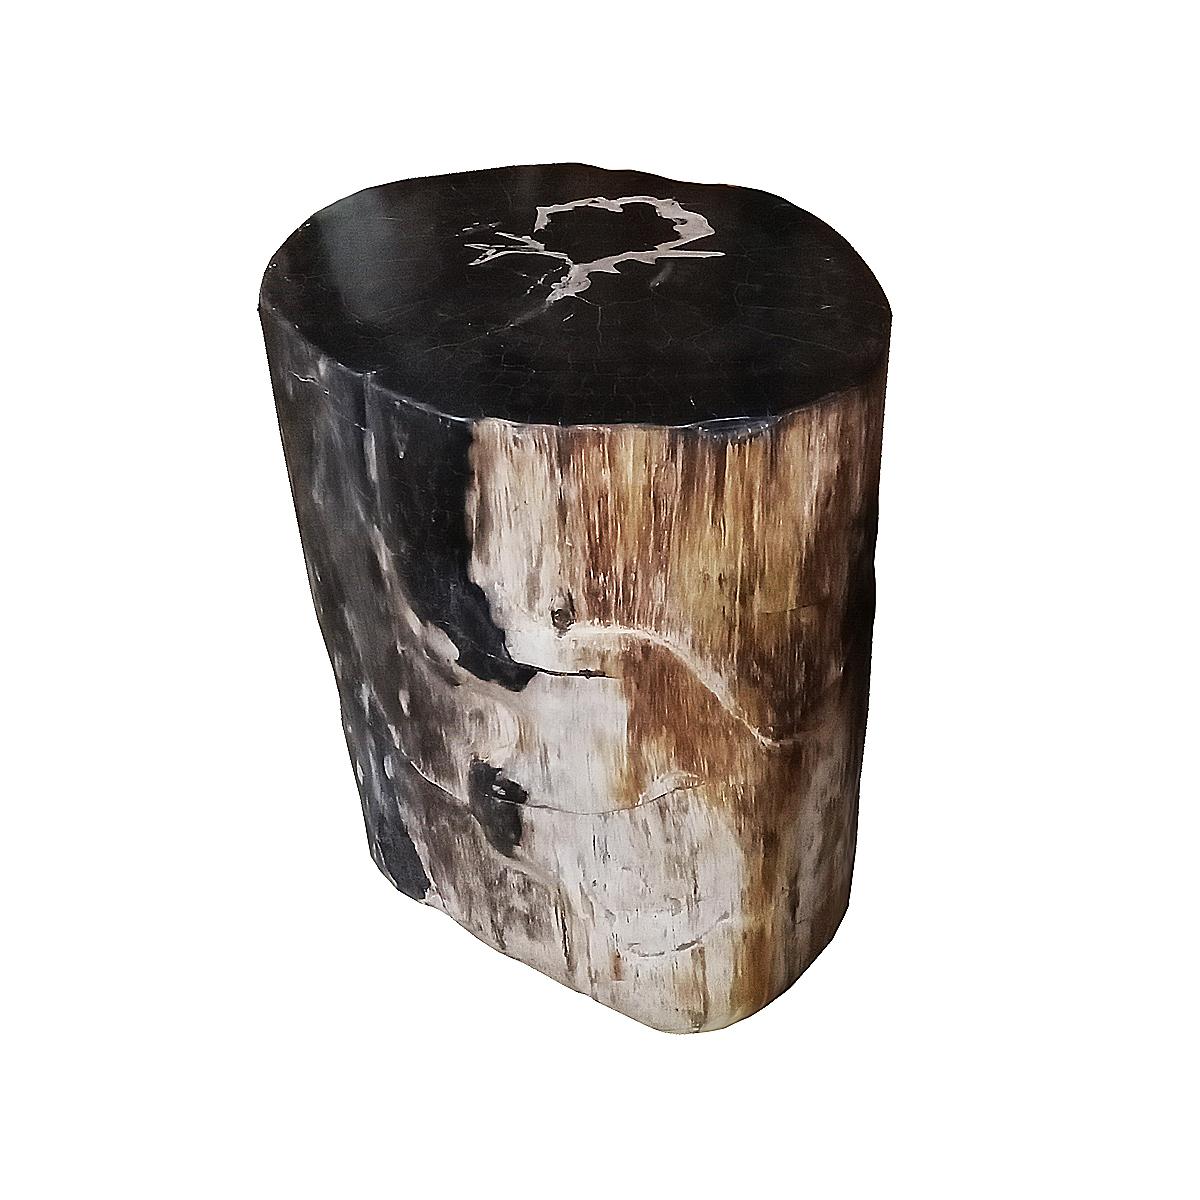 A stunning end or side table, carved out of 20-million old Indonesian petrified wood. Cut and polished to reveal the spectacular veining and colors of the rock-solid wood. At 7 in the Mohs scale, petrified wood is a very hard and durable material,